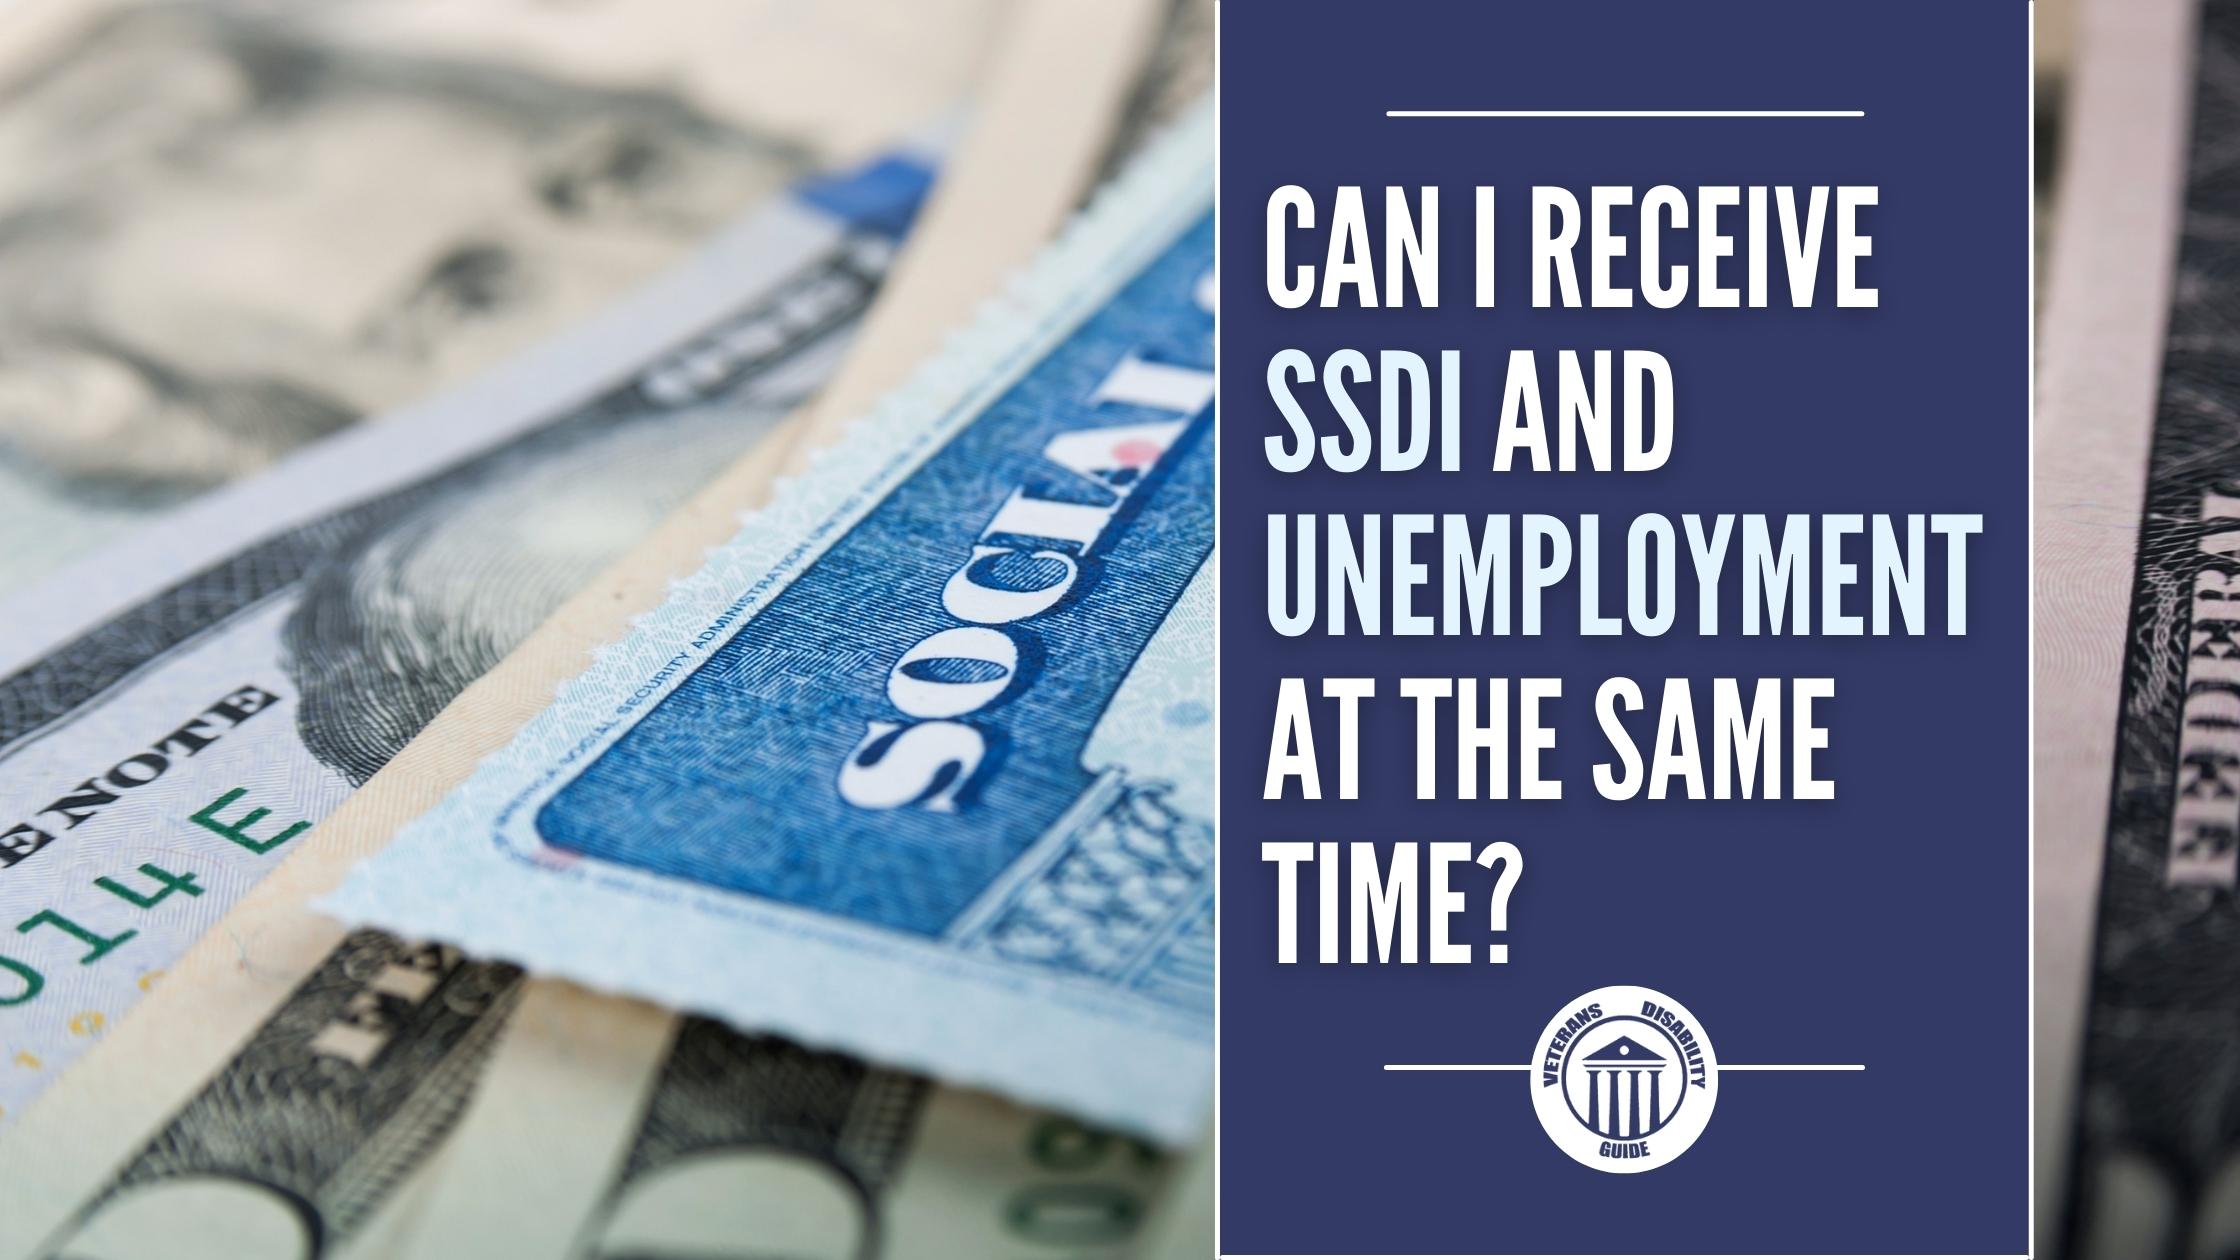 Social Security card on top of money, with the text "Can I Receive Unemployment and SSDI at the Same Time?